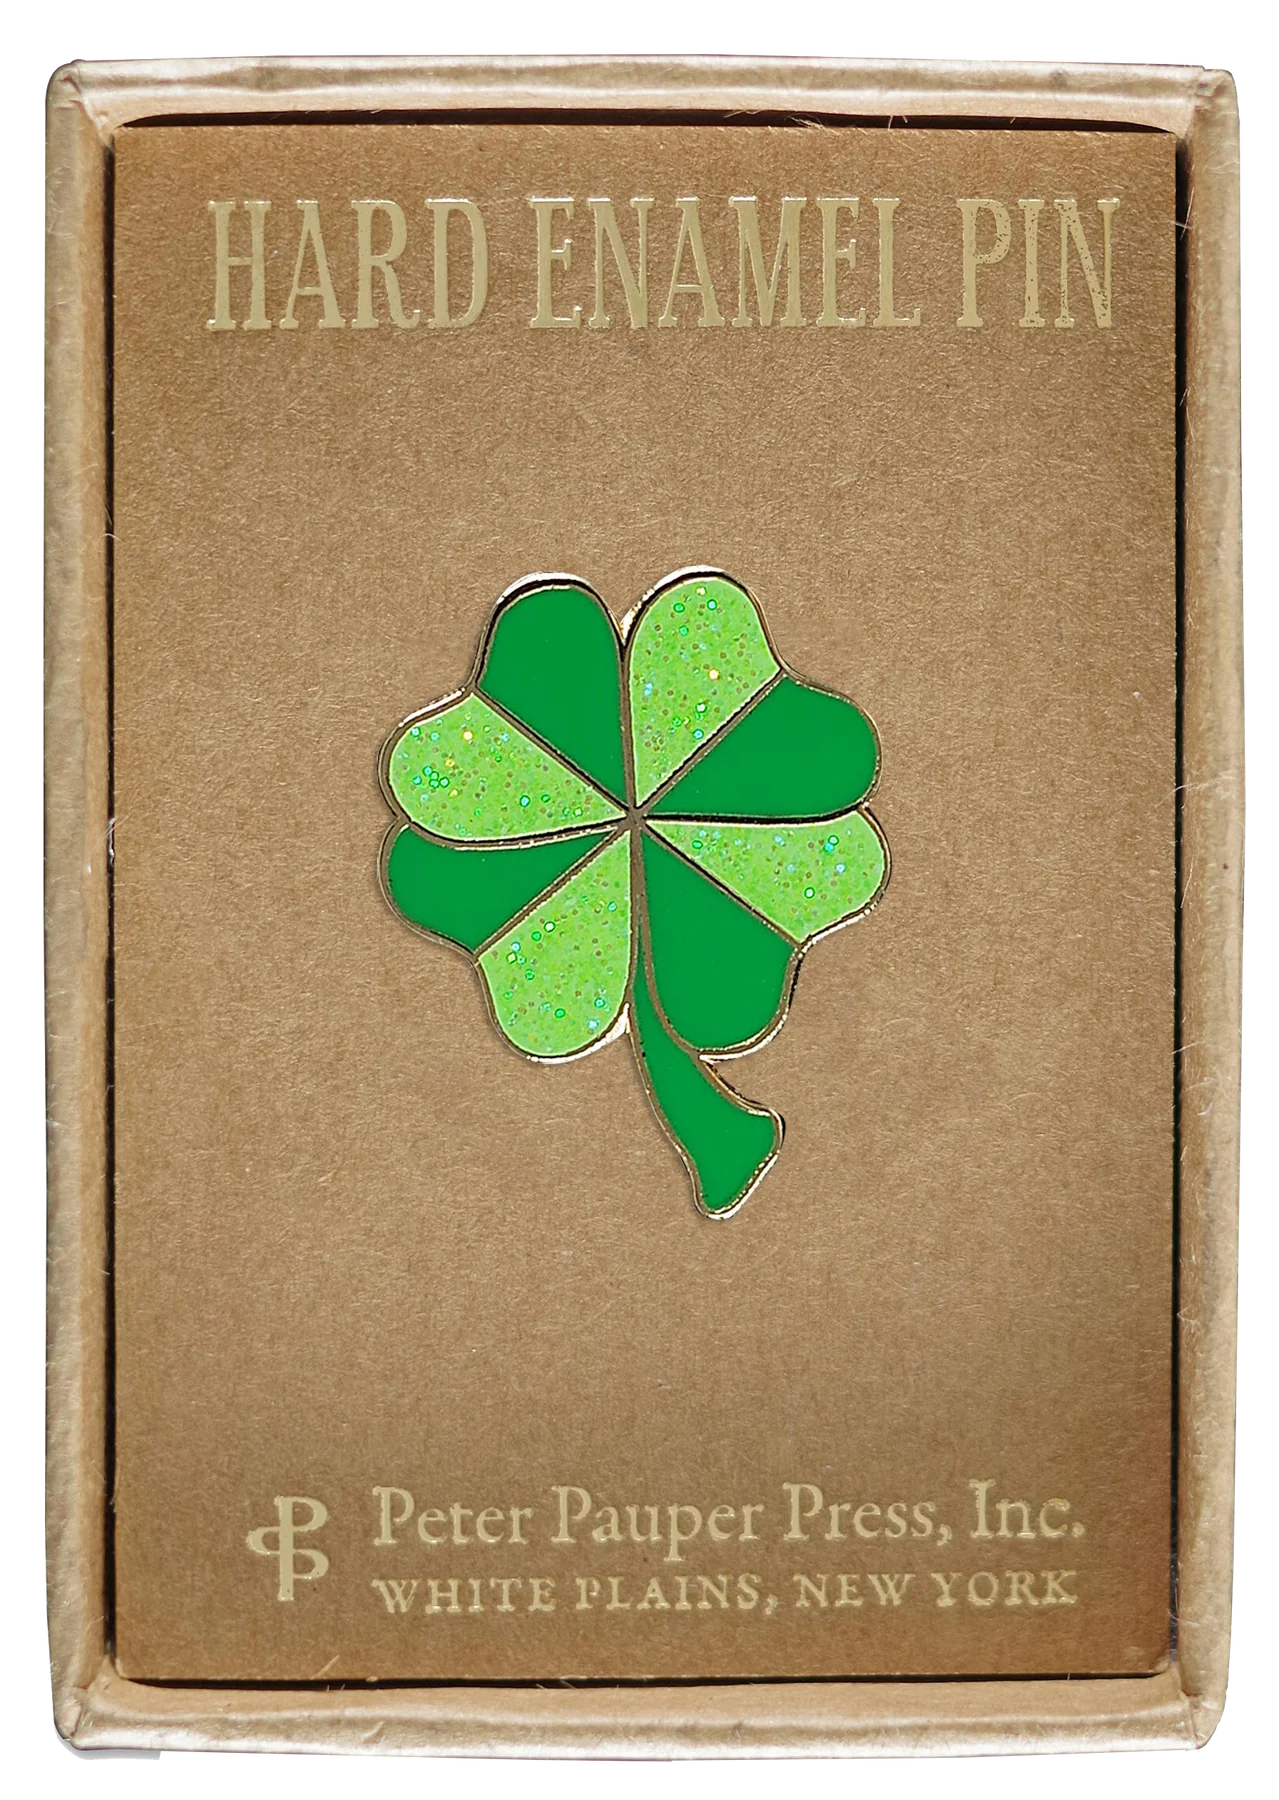 green and light green four leaf clover attached to a box that says hard enamel pin